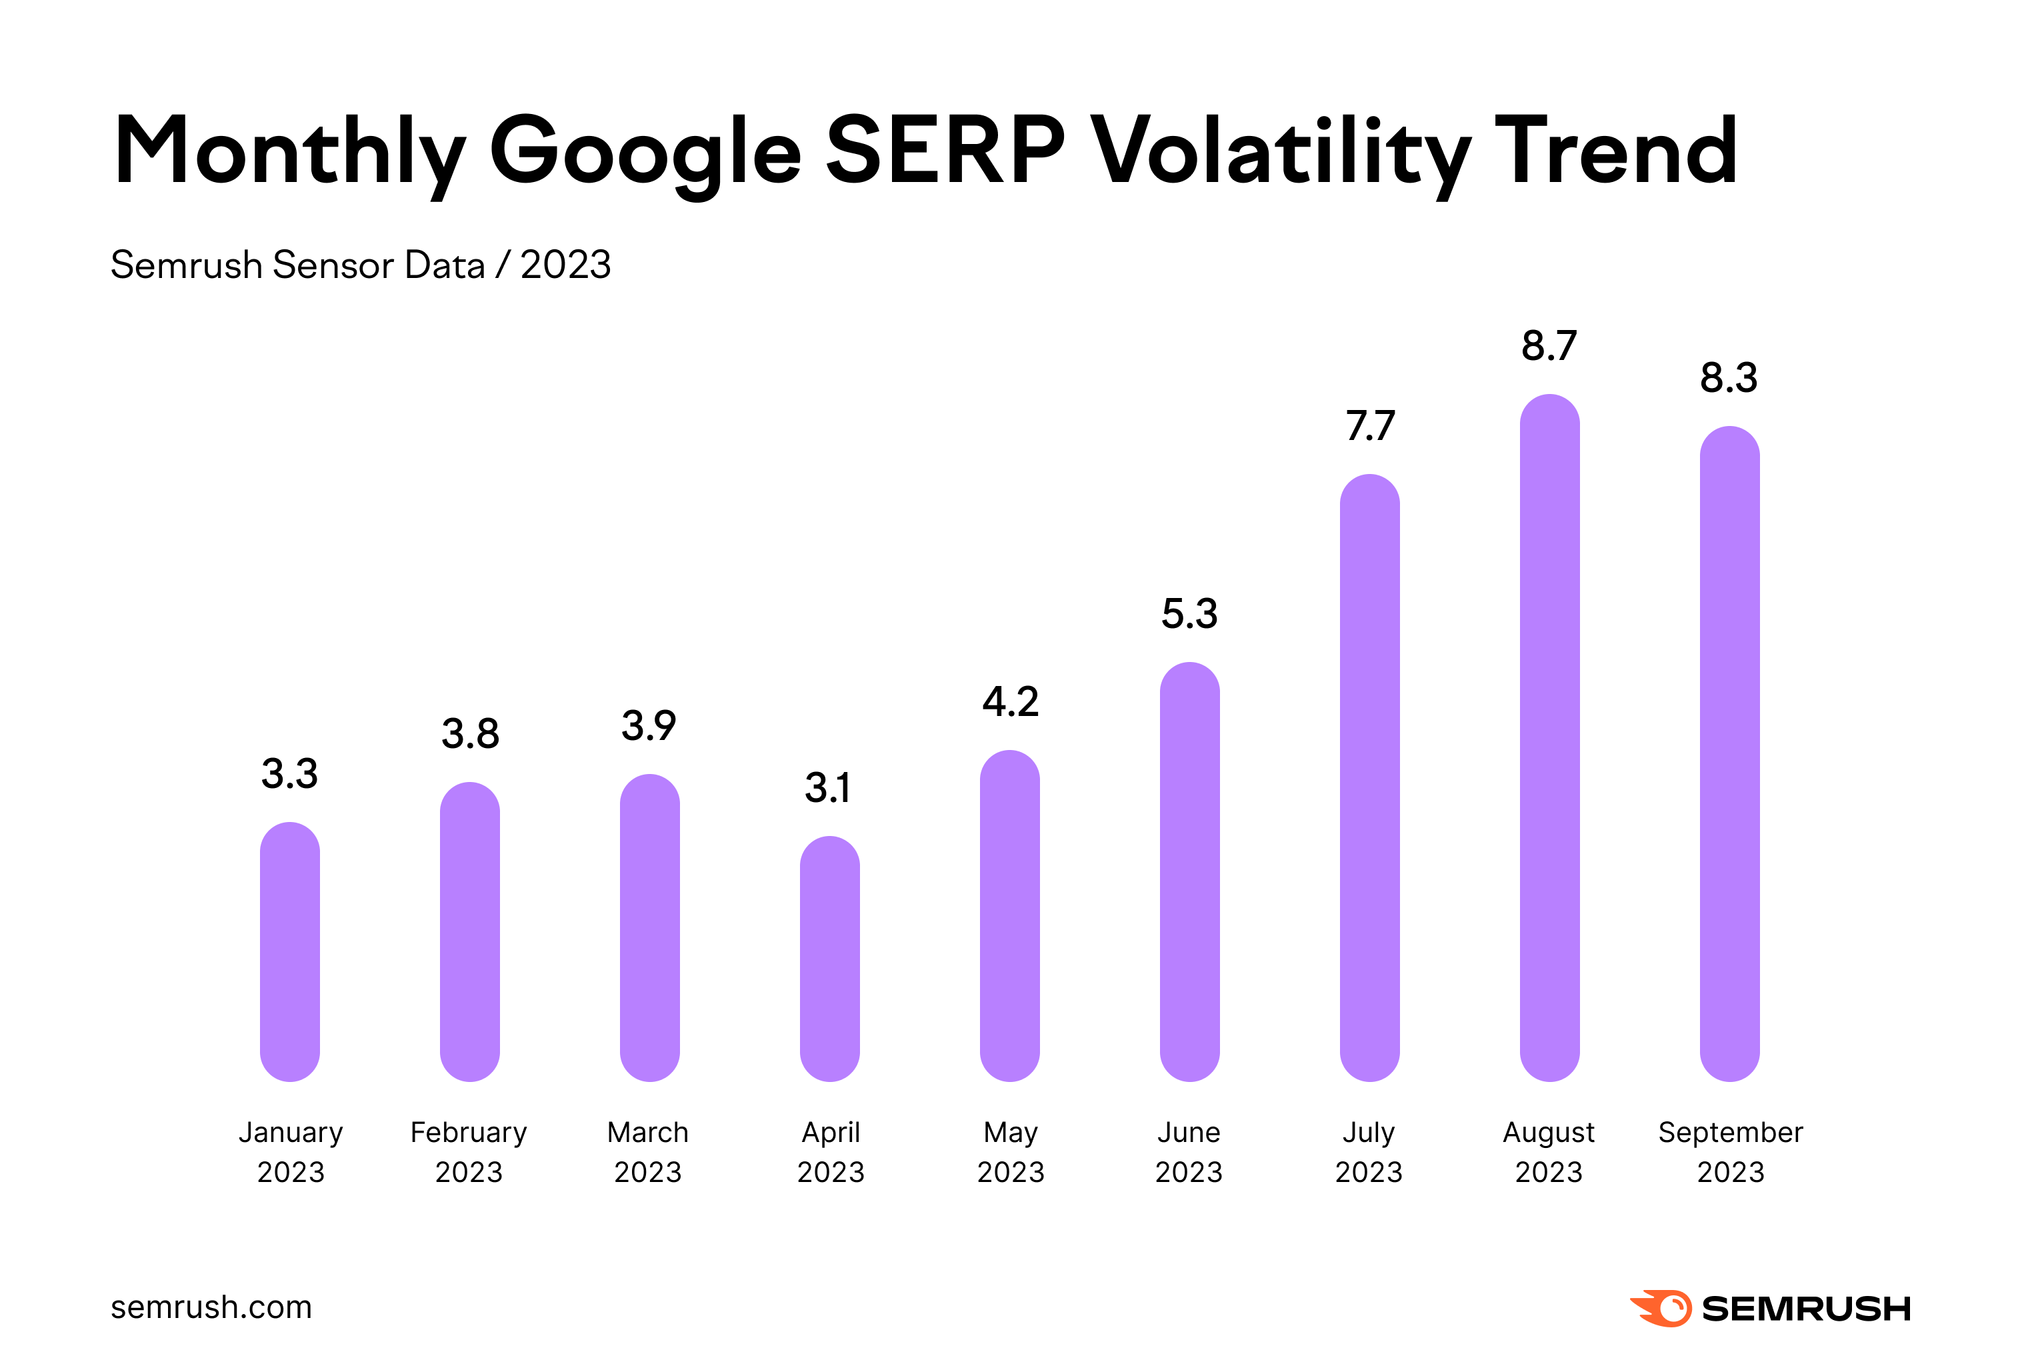 Graph showing montly Google SERP volatility trends for January to September 2023.